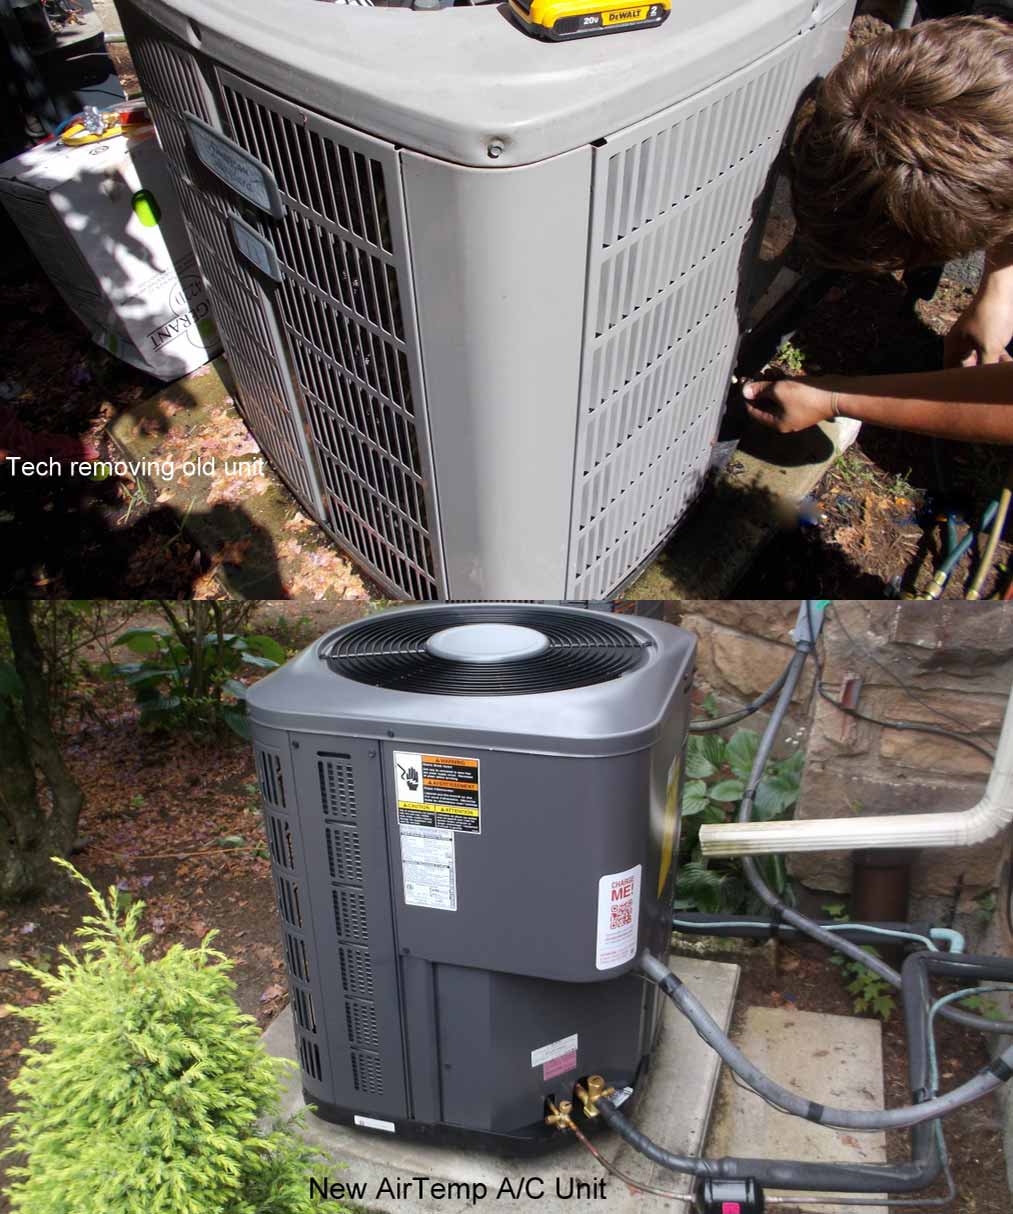 New AirTemp AC unit installed by Skone's Advanced Heating & Cooling